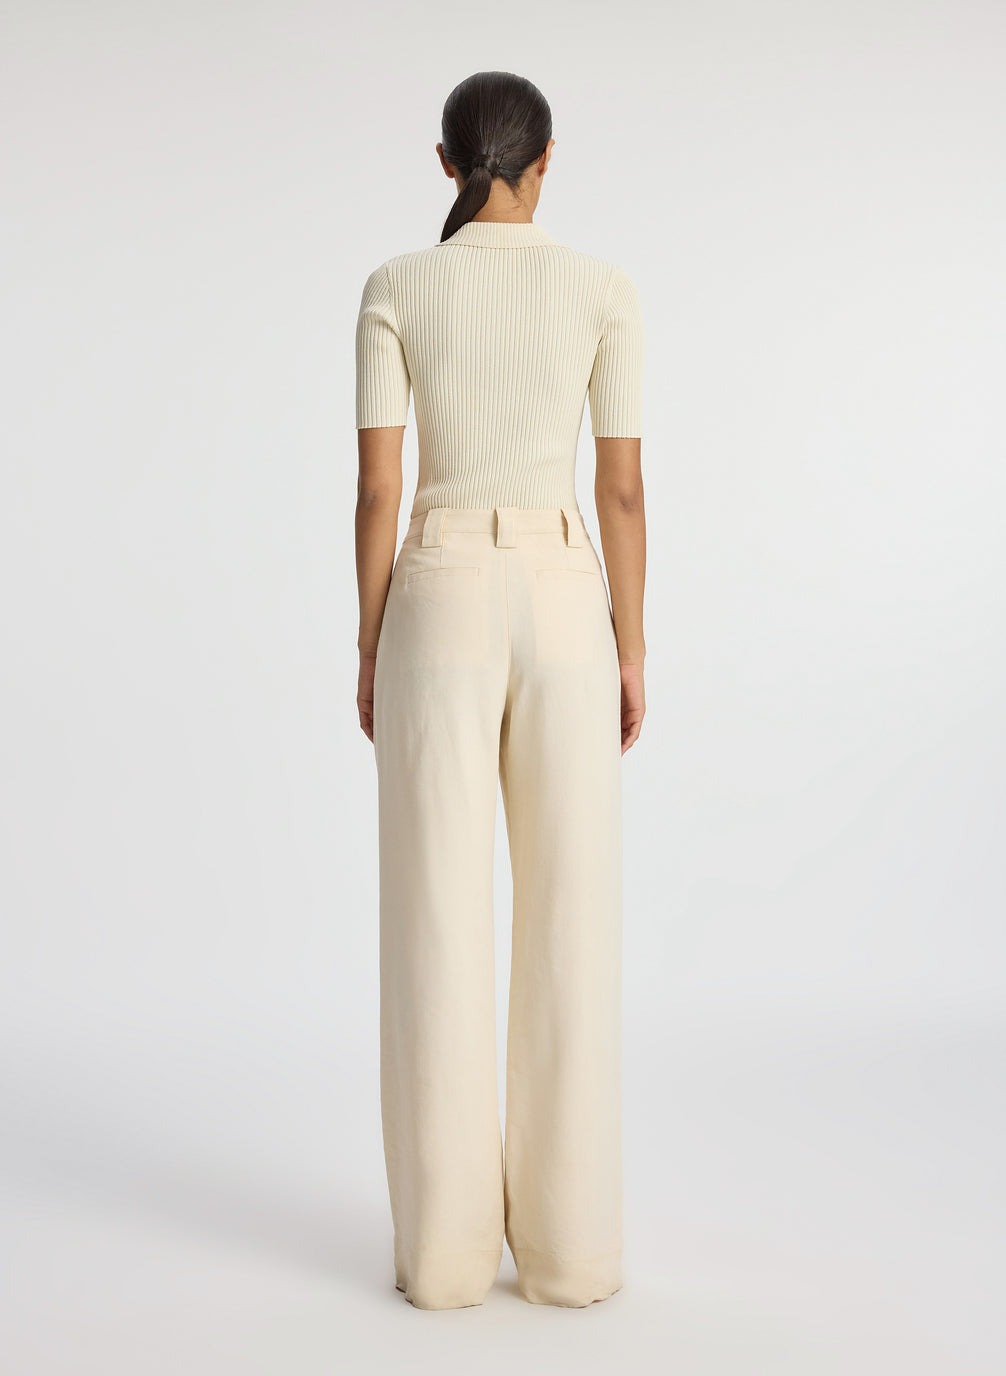 back view of woman wearing cream short sleeve collared top and beige pants